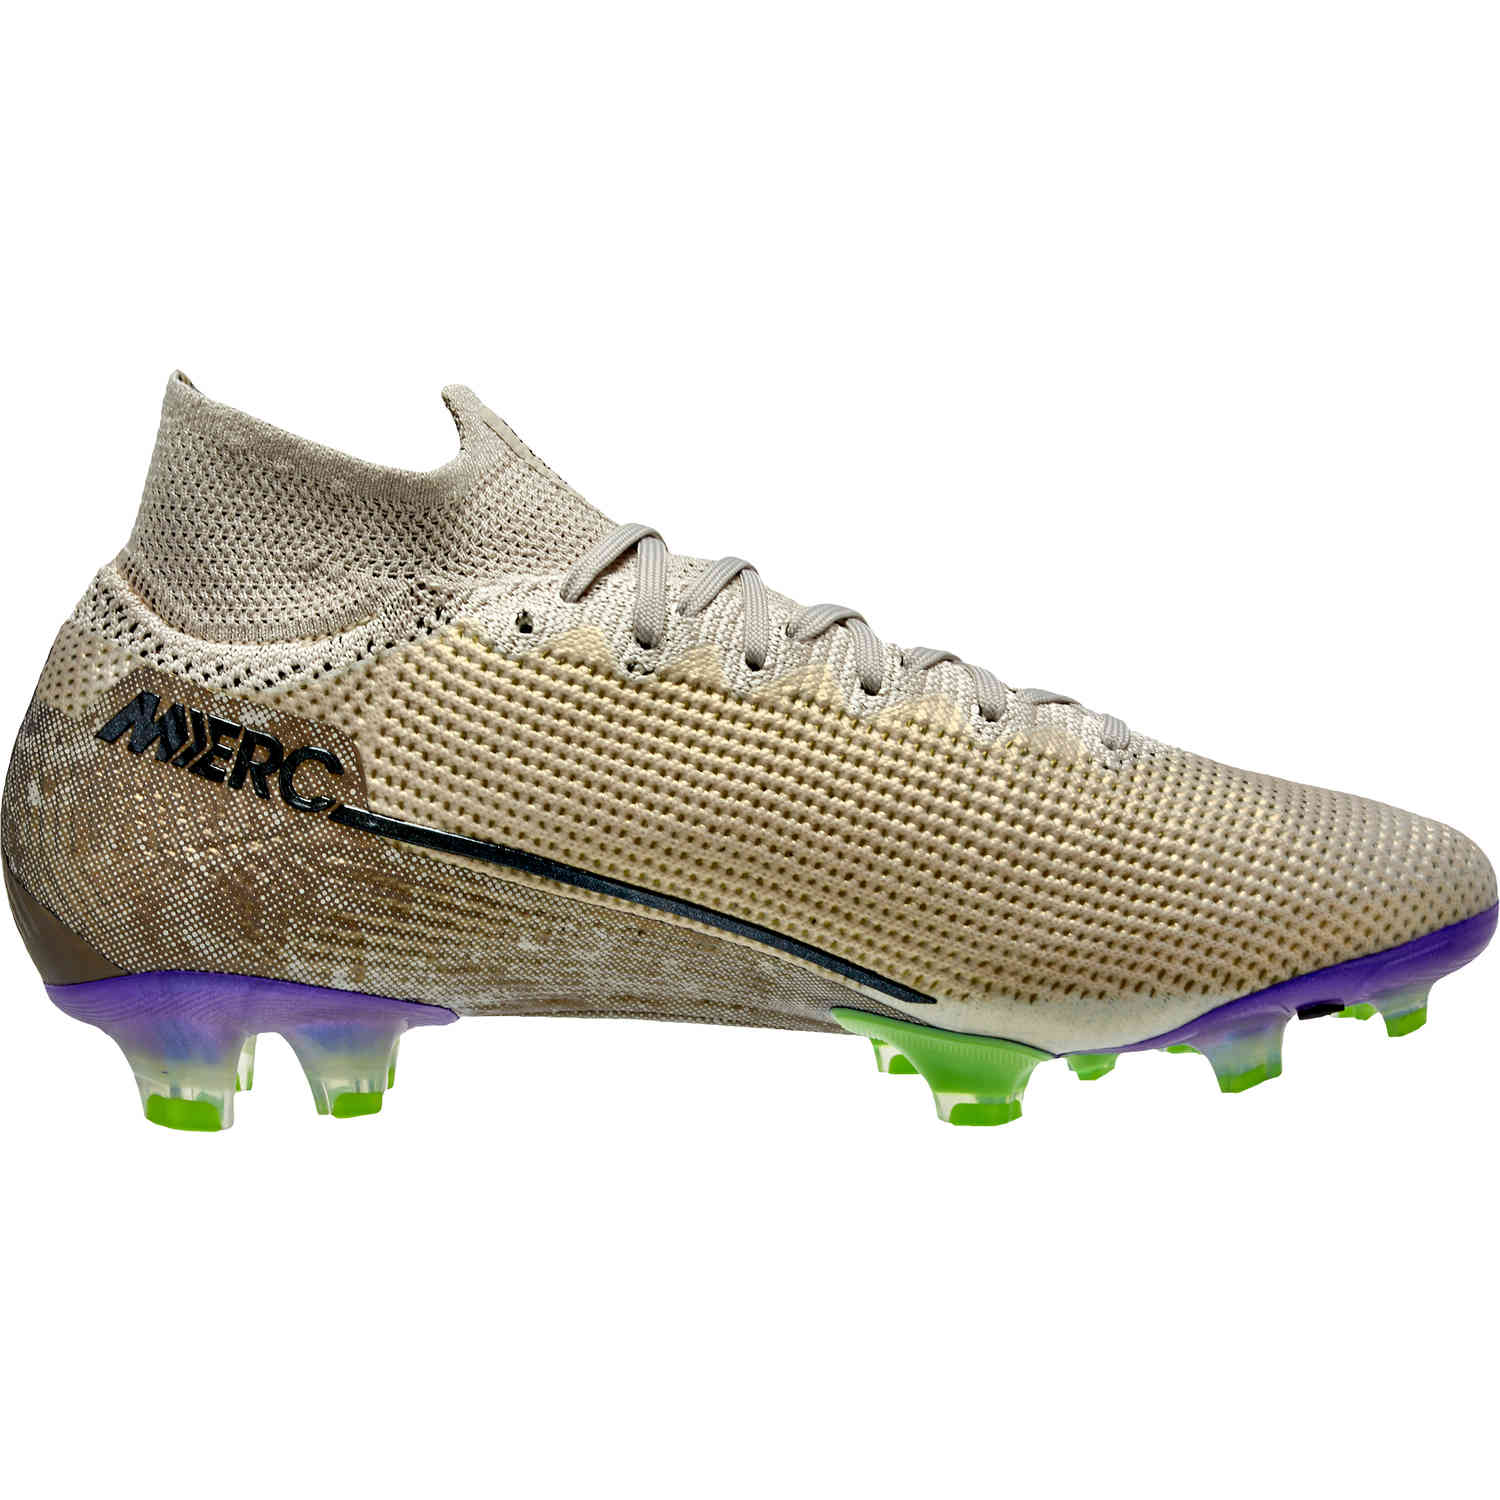 Nike Mercurial Football Boots Superfly, Vapor, Victory